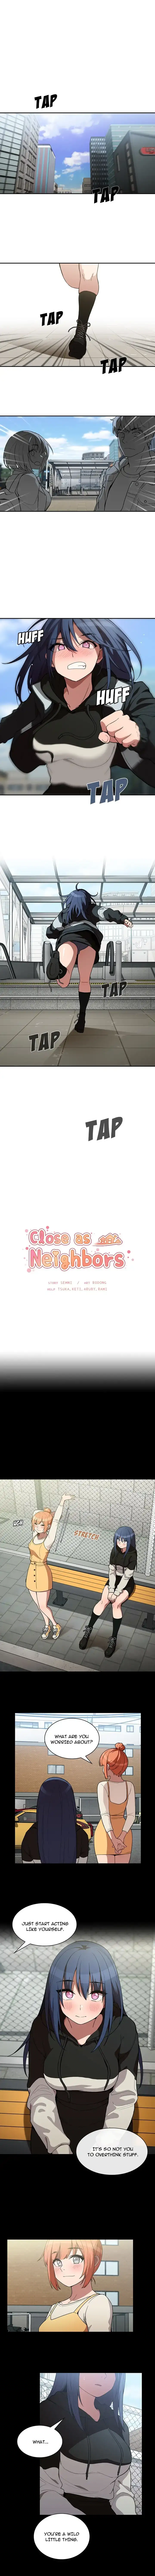 Close as Neighbors - Chapter 42 Page 1